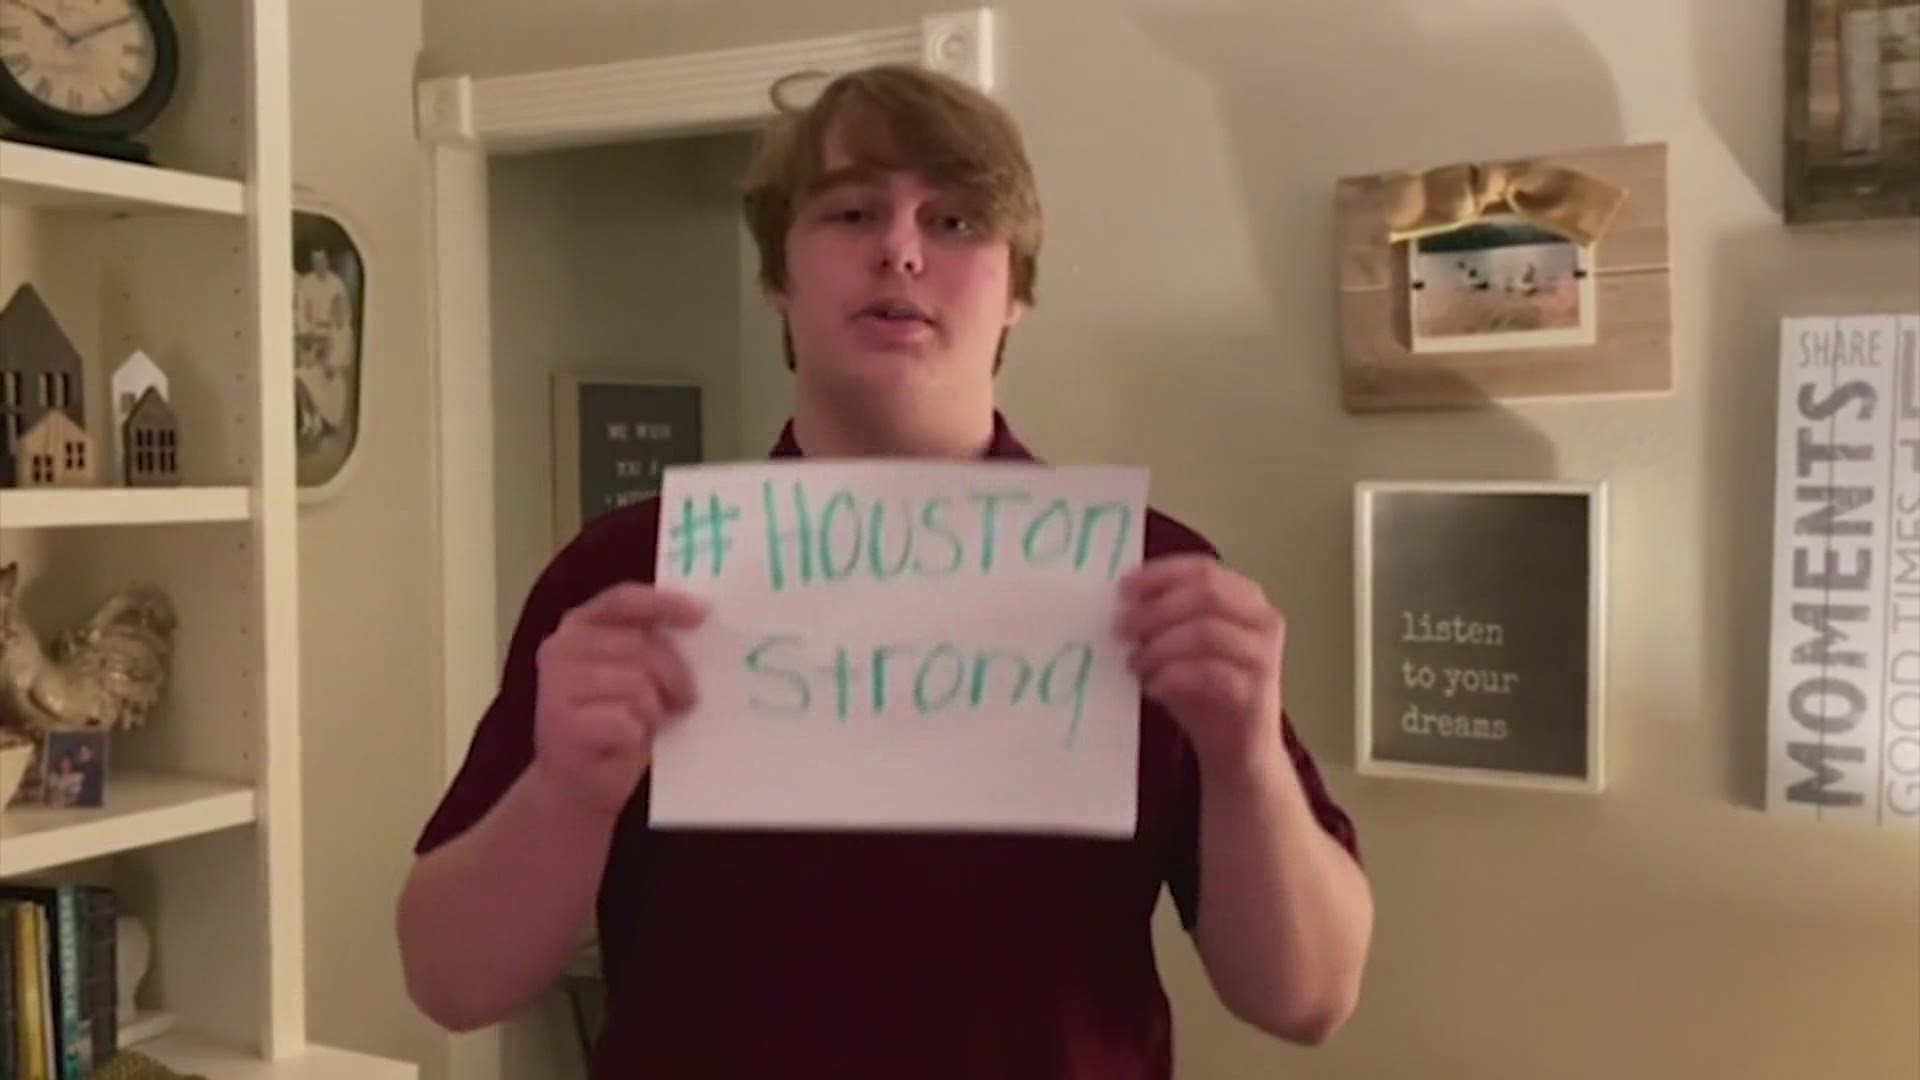 We've seen so many Houstonians supporting each other after the devastating winter storm. That includes a message of unity from a group of high school students.